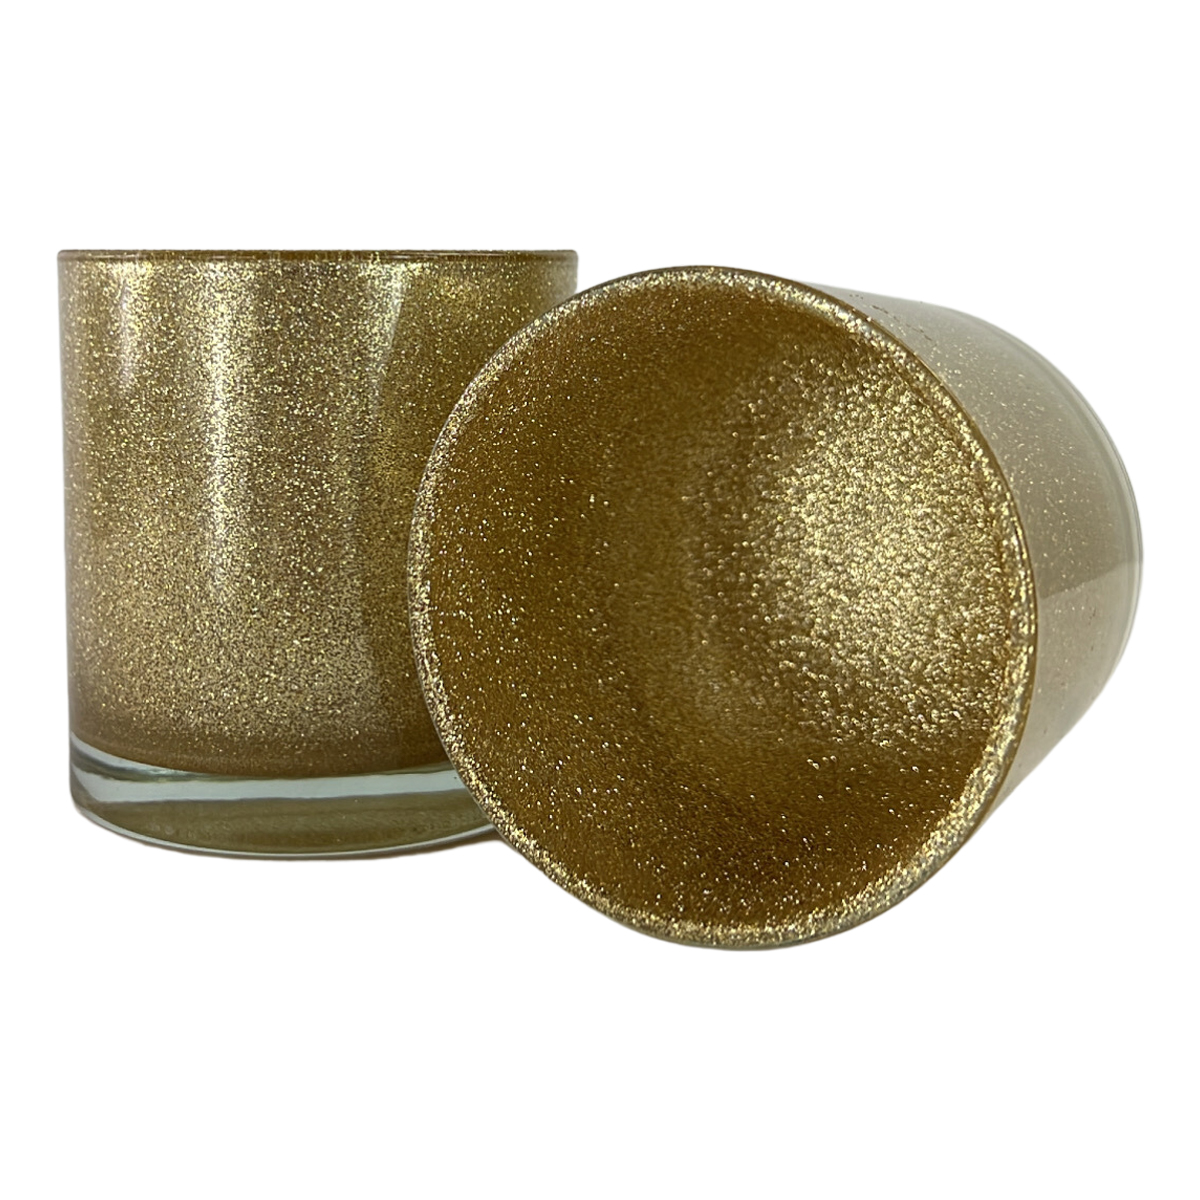 Monticiano glitter gold candle jars